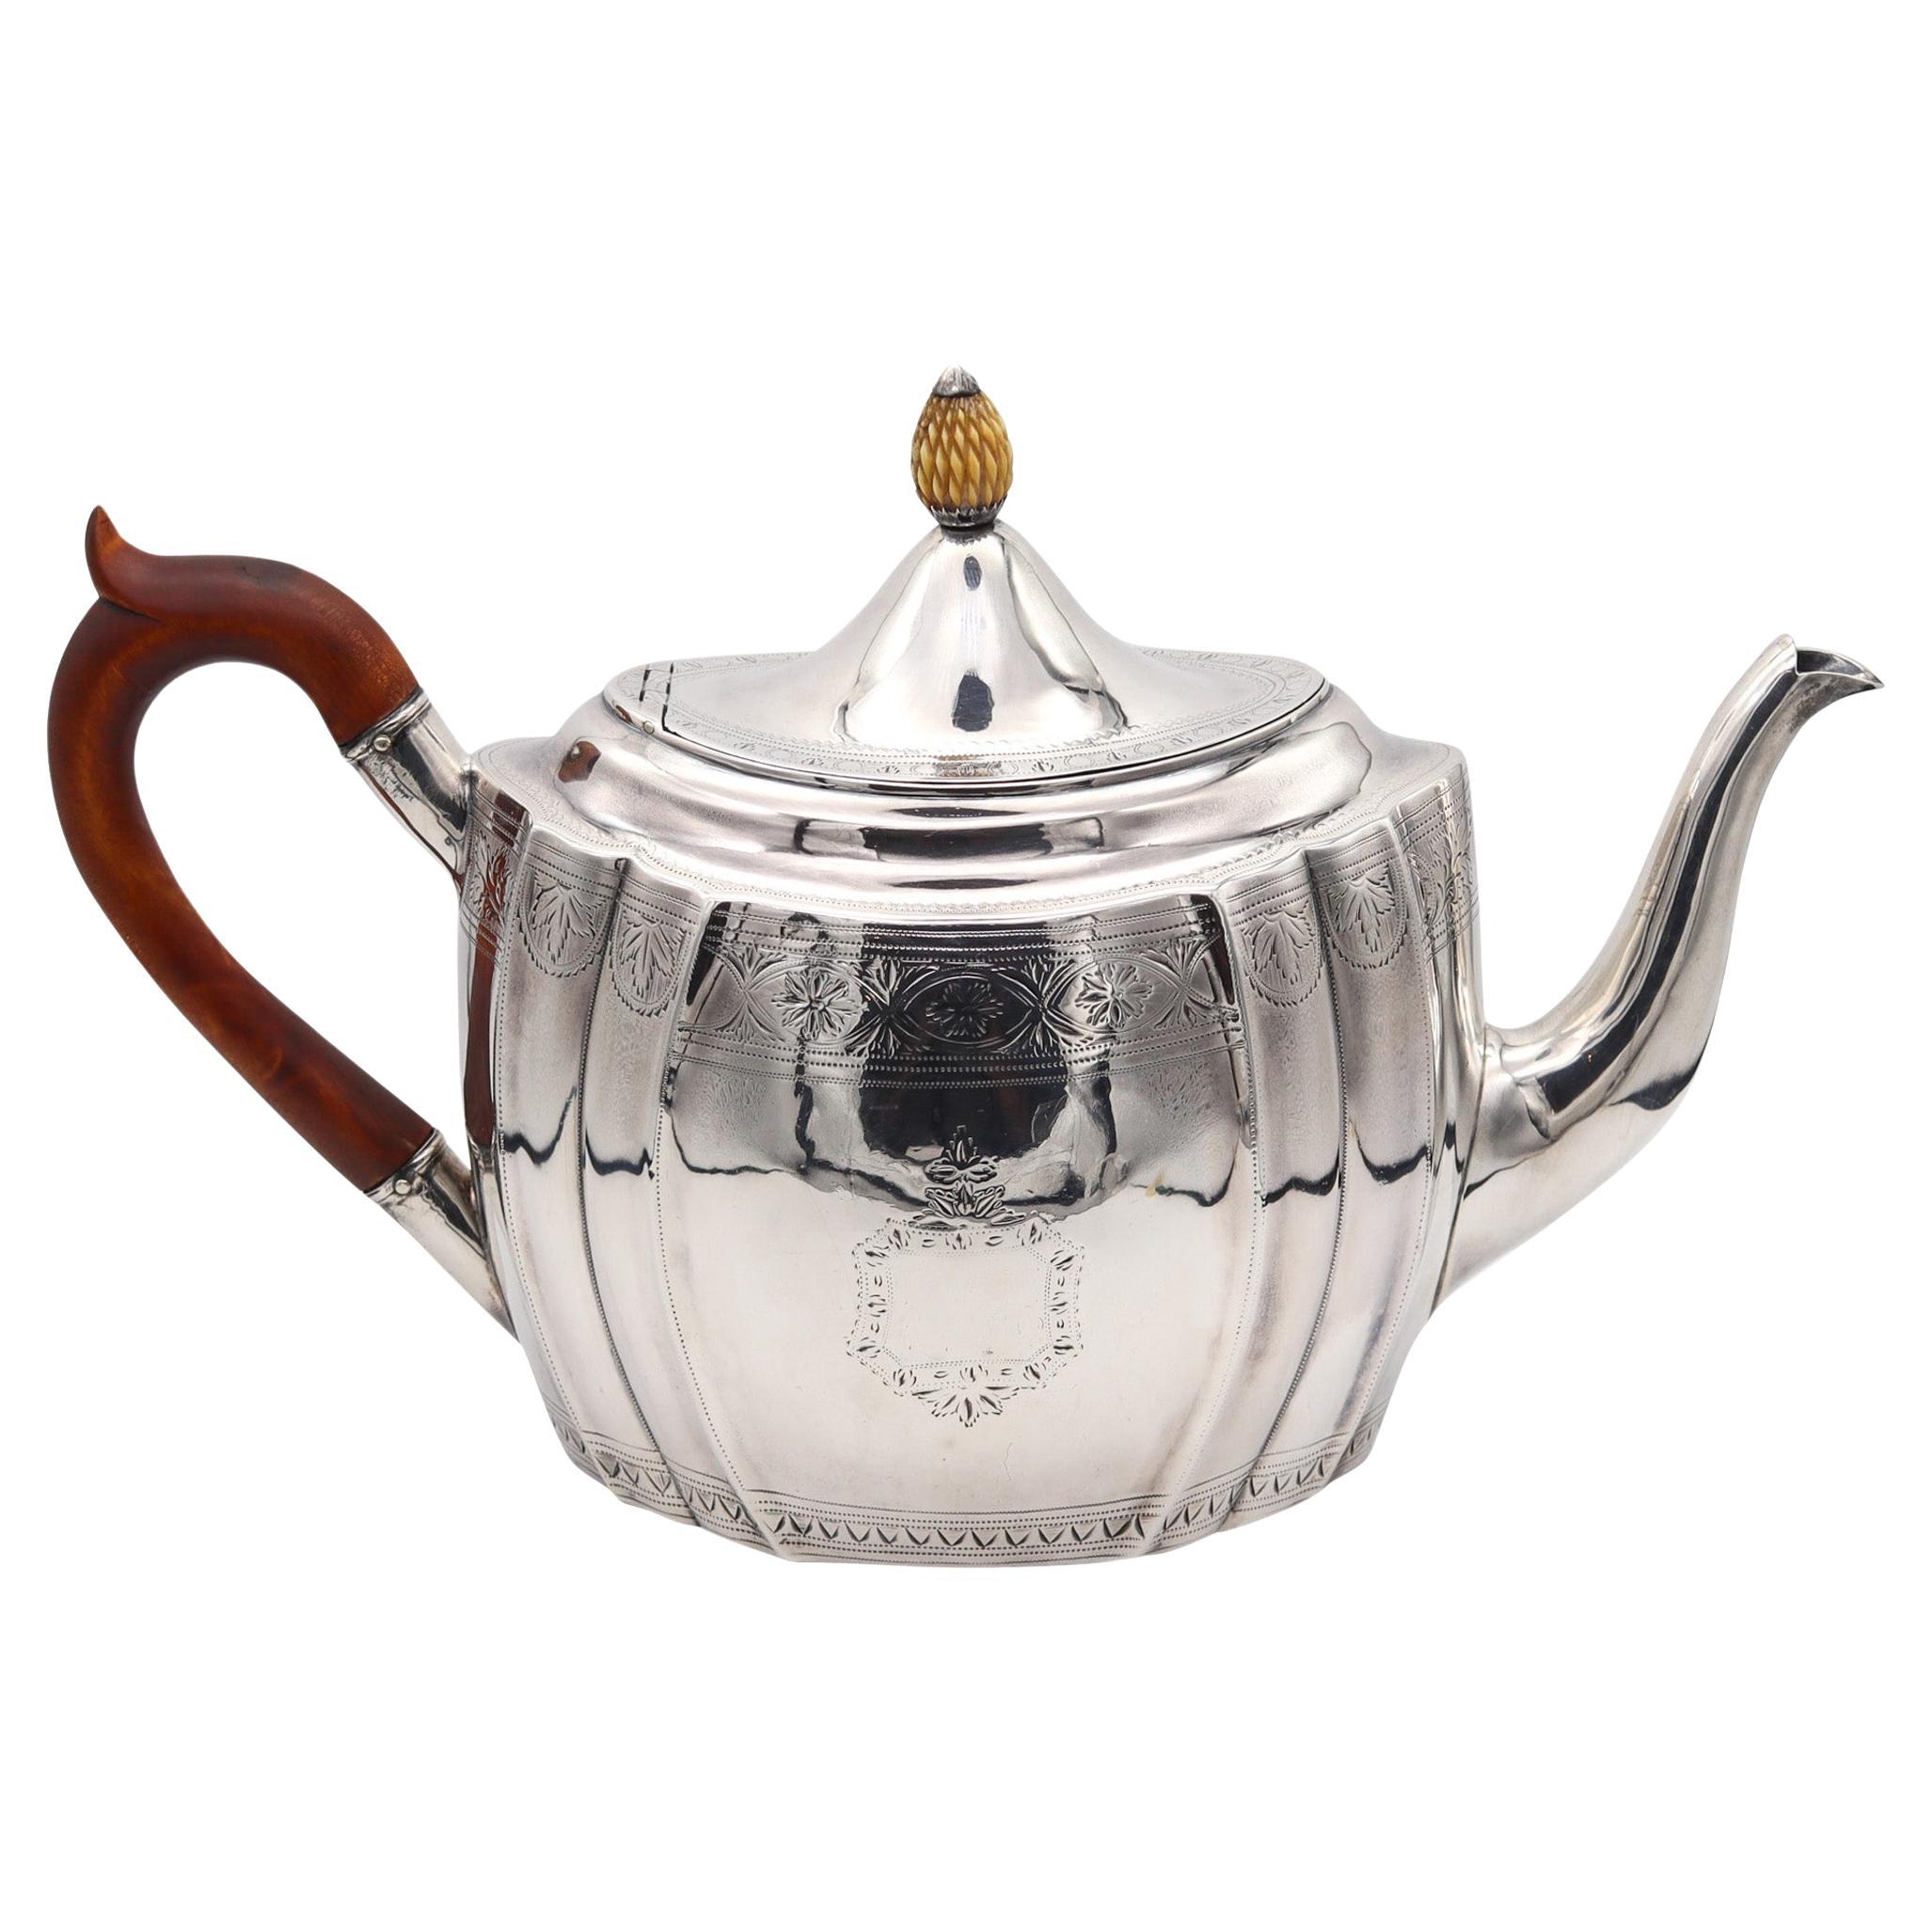 Richard Sawyer 1801 Dublin Coffee-Tea Pot In 925 Sterling Silver With Brown Wood For Sale